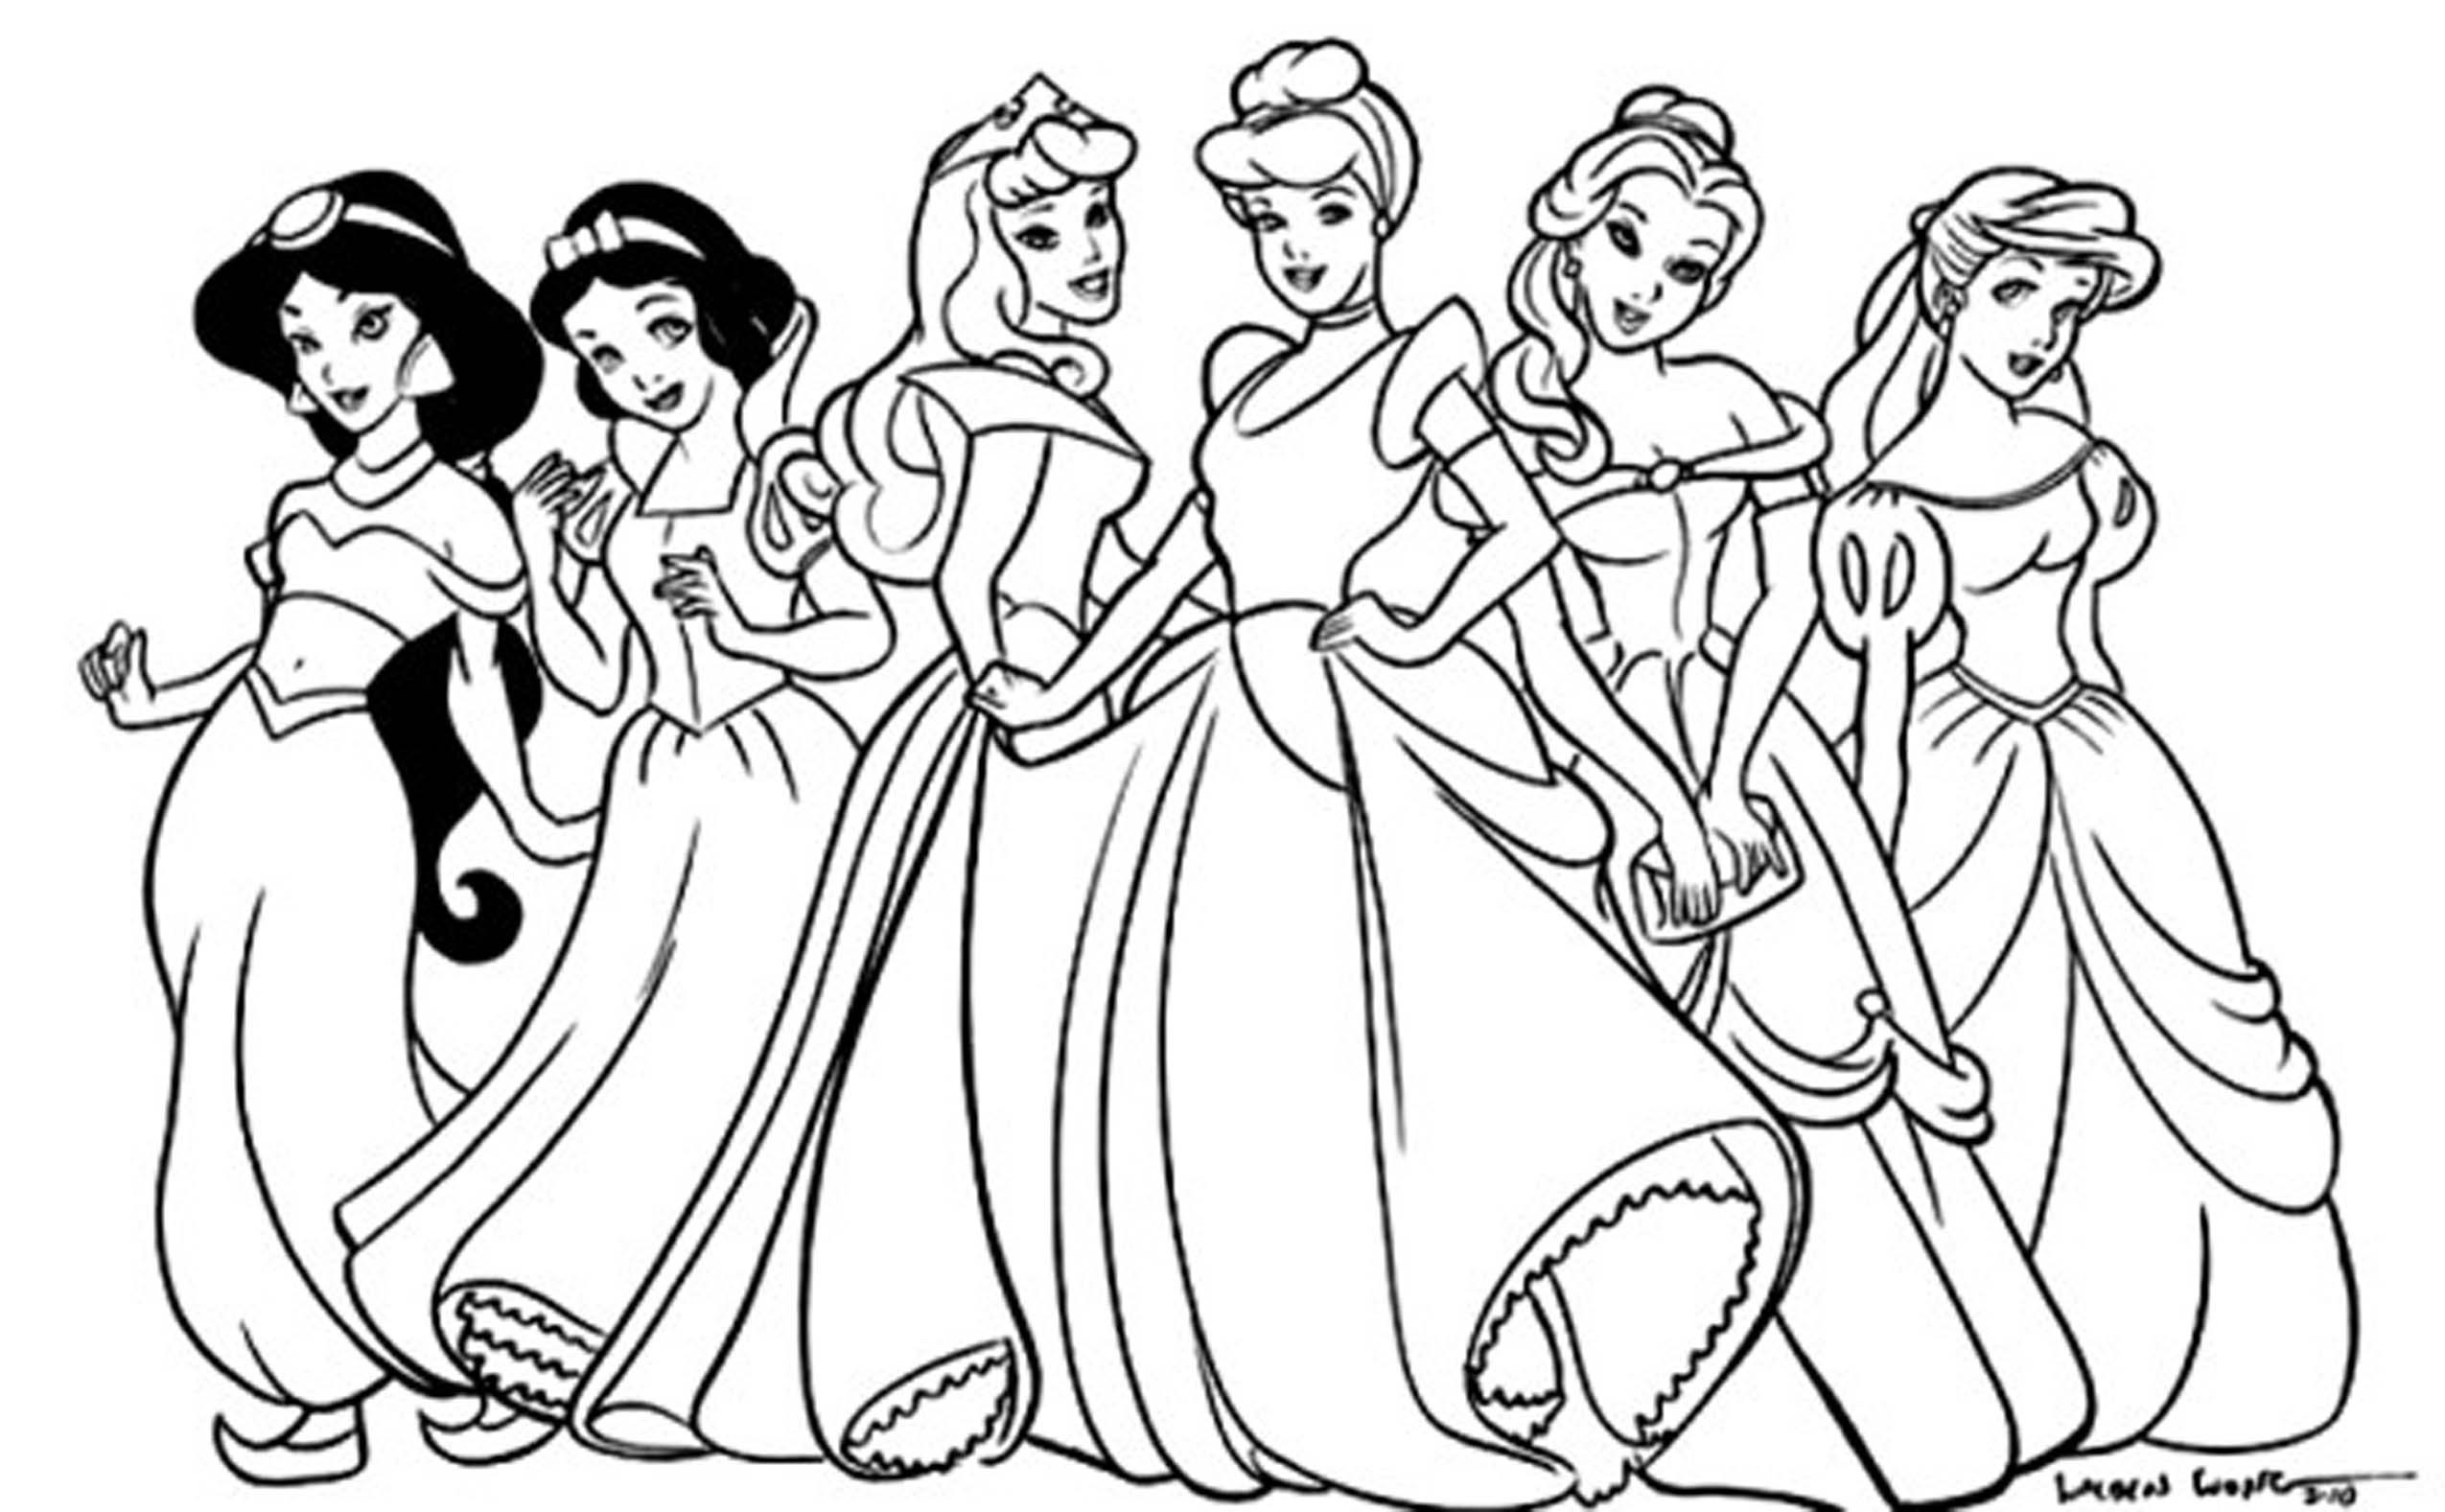 The best free Fiona coloring page images. Download from 92 free